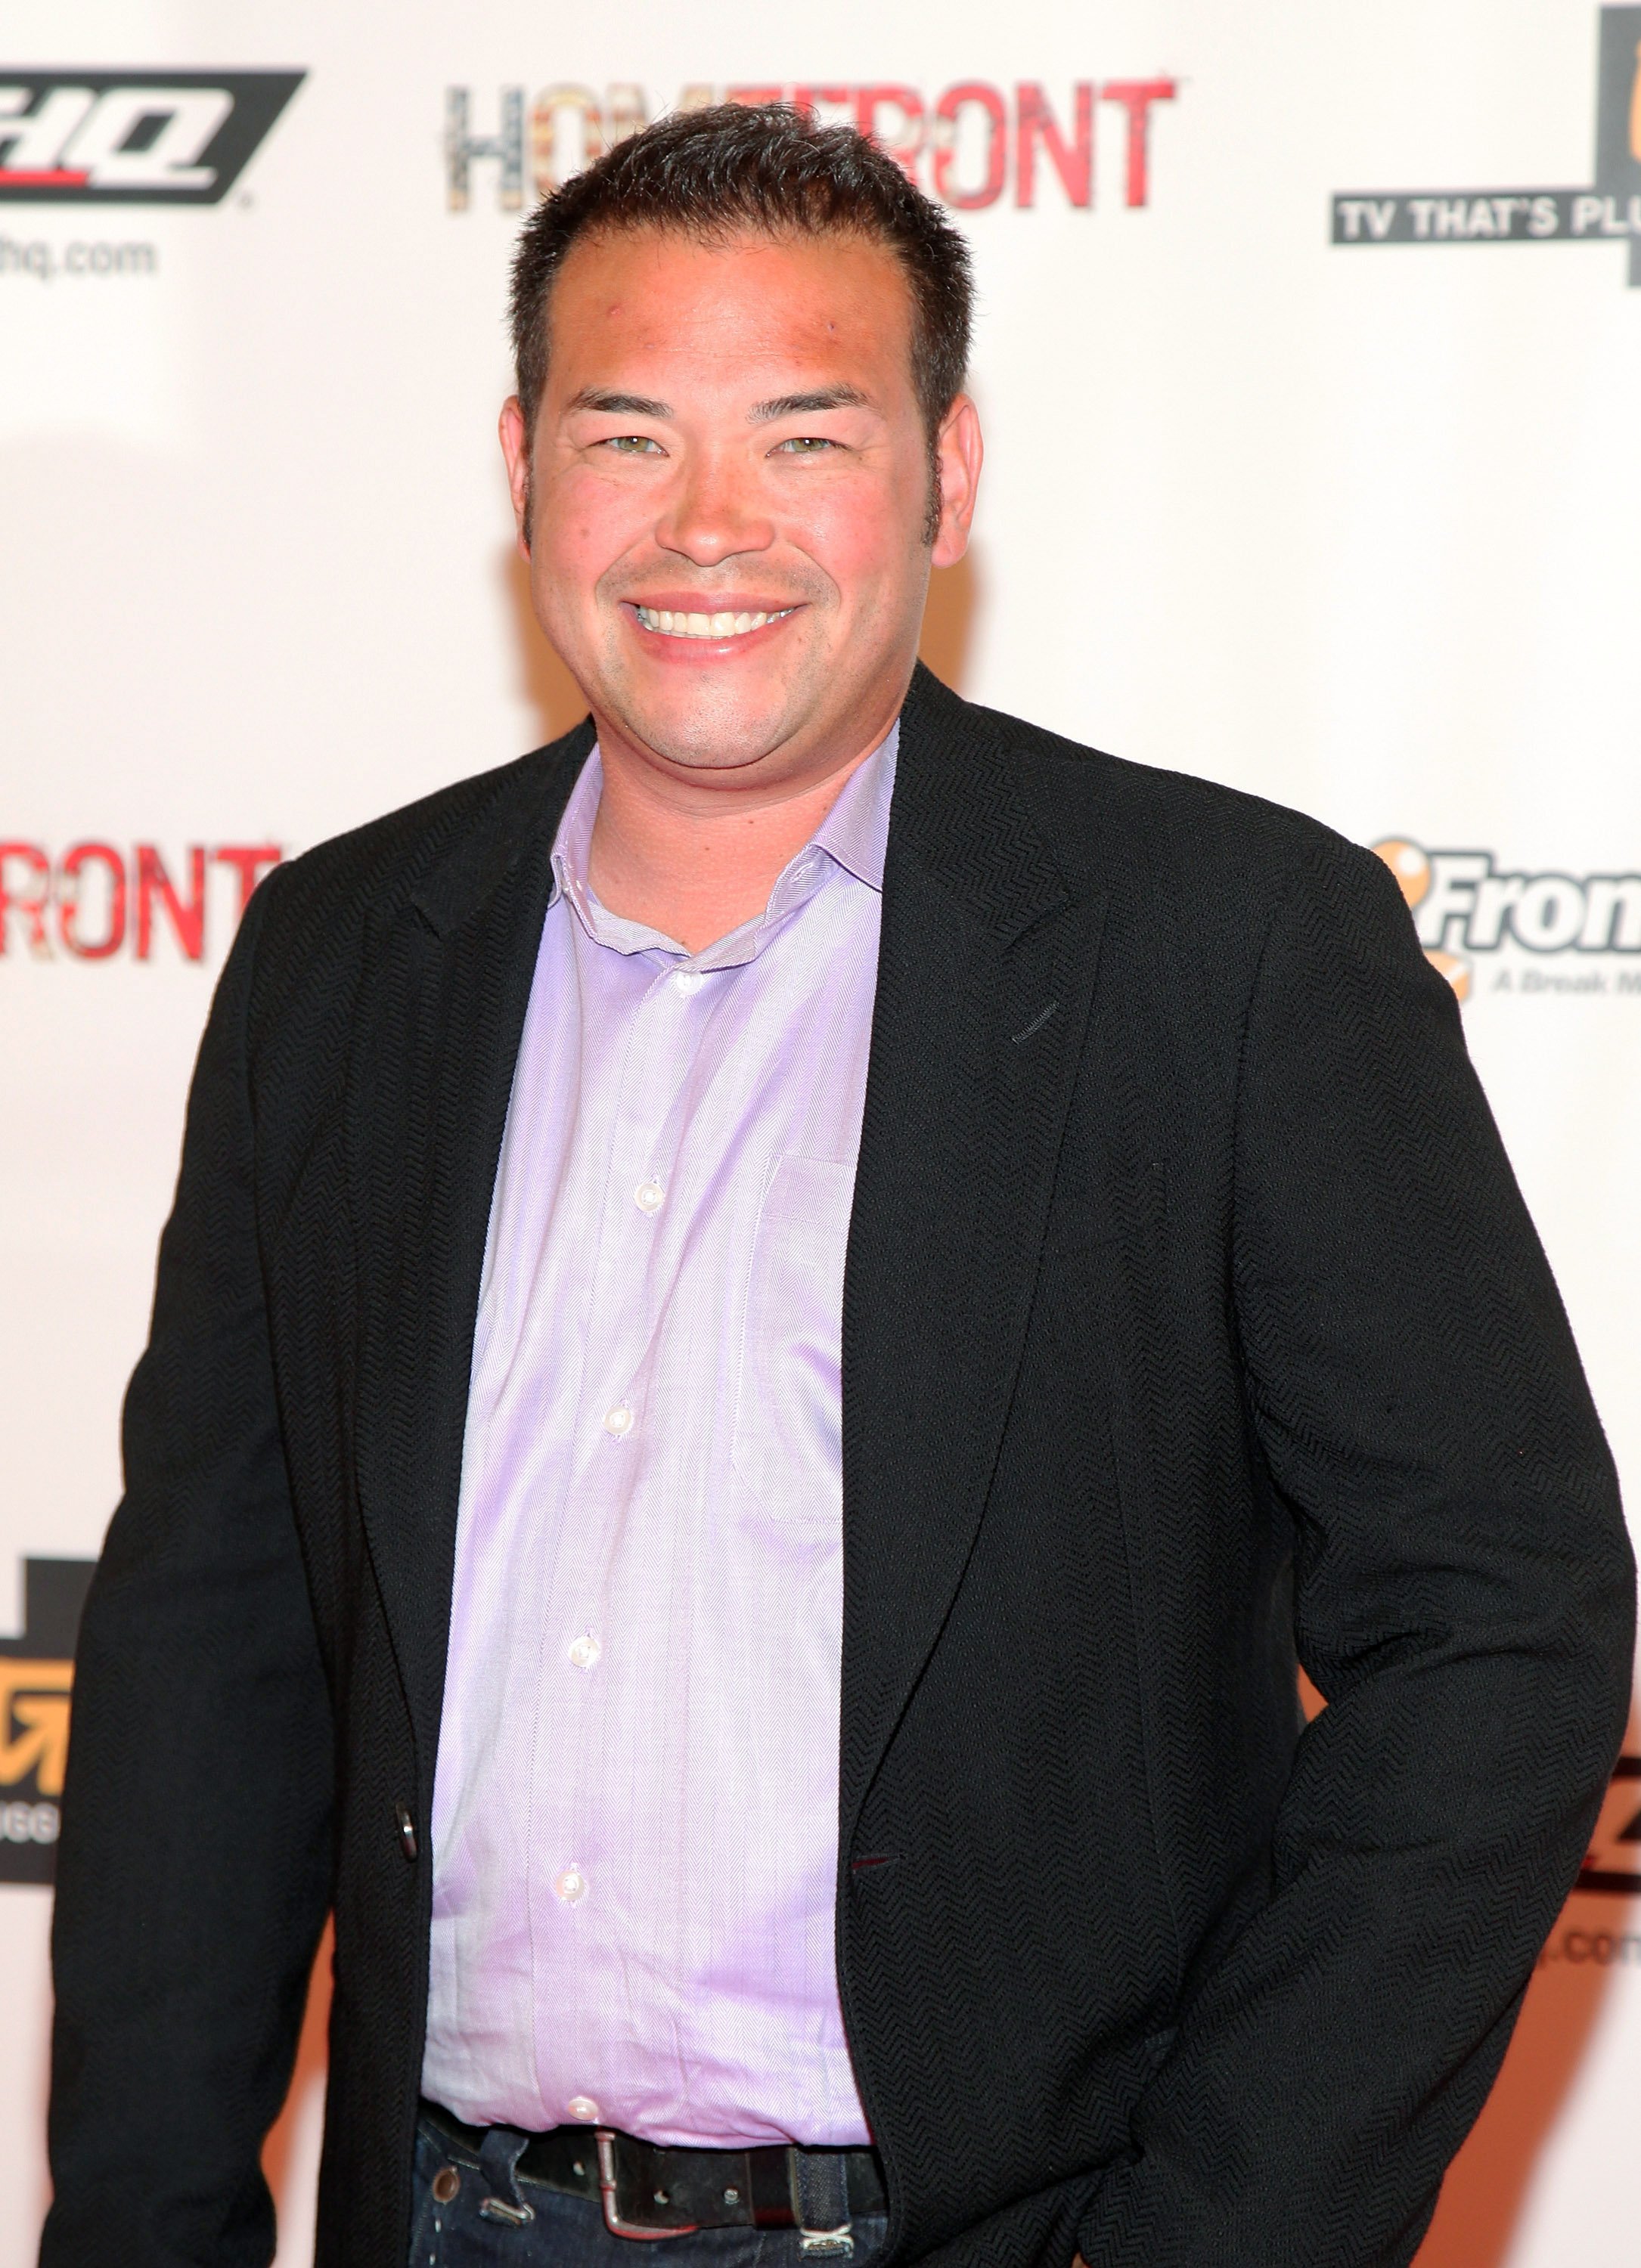 TV reality star Jon Gosselin attends the 2010 THQ's E3 "Take No Prisoners" event in Los Angeles, California. | Photo: Getty Images